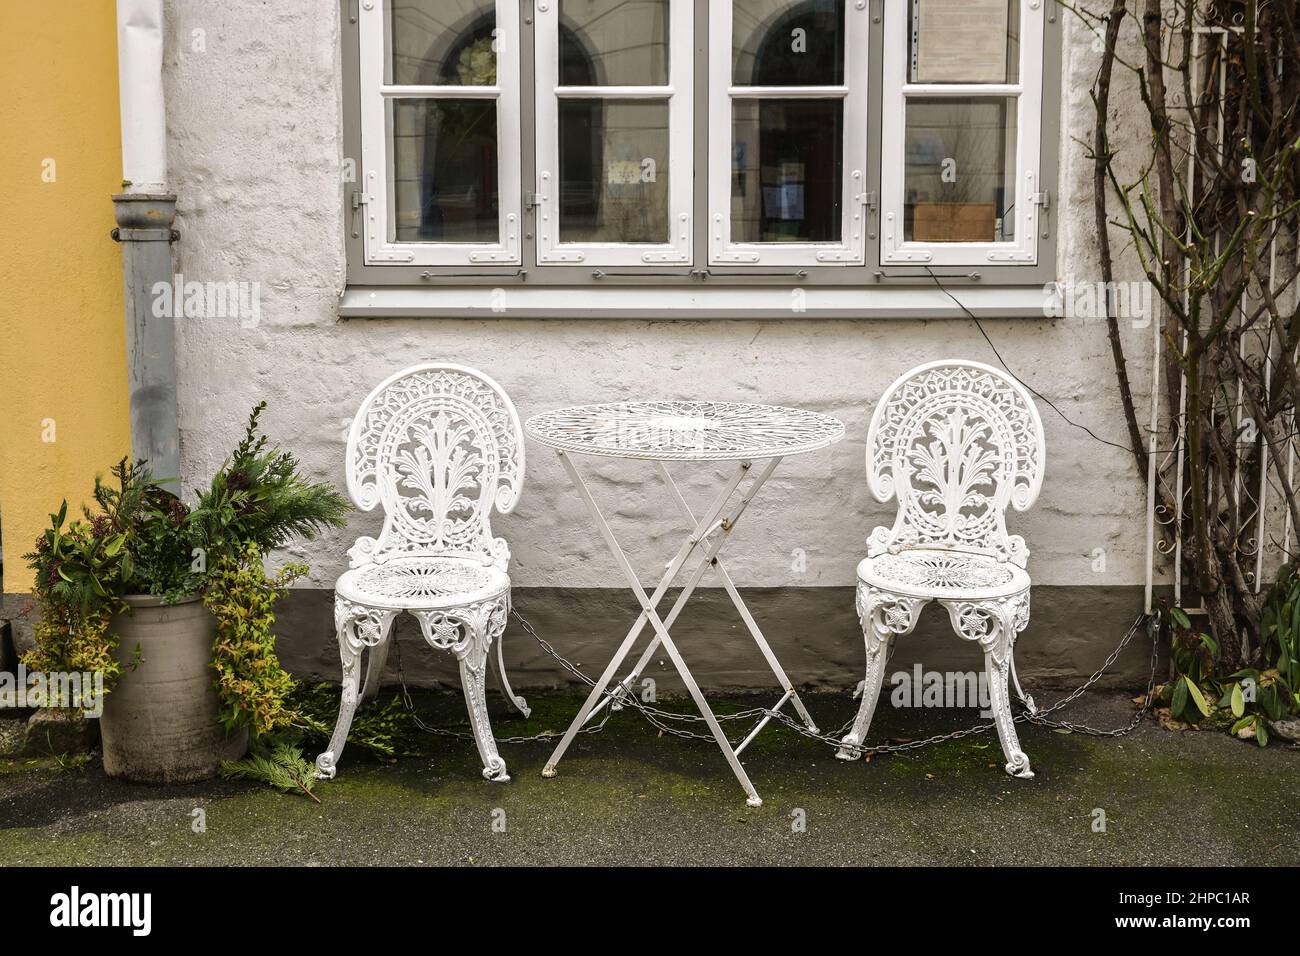 White painted iron chairs and a folding table with decorative vintage ornaments on the sidewalk in front of a historic house facade in the old town of Stock Photo